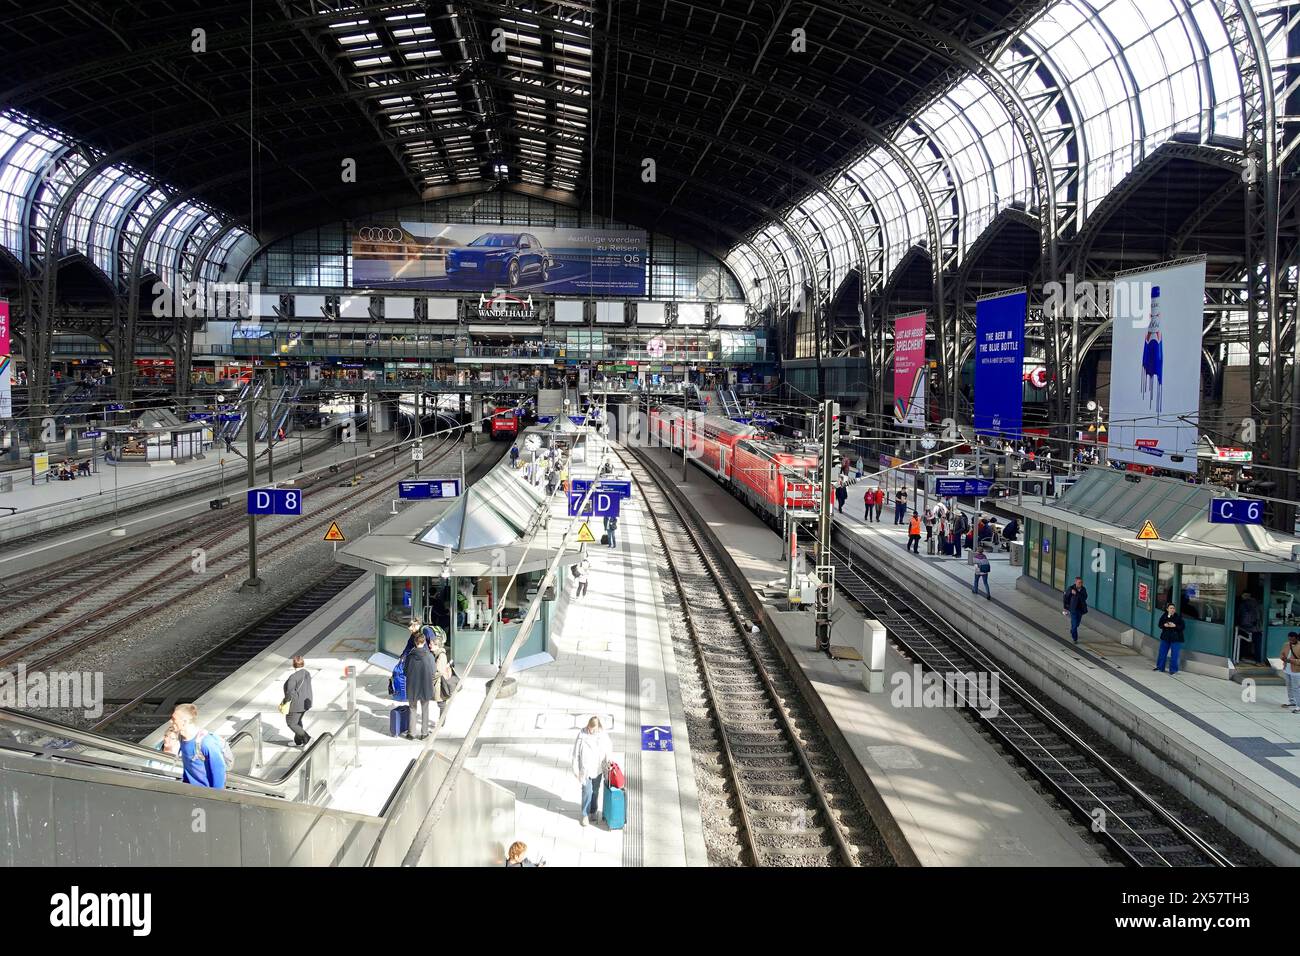 Hamburg Central Station, Hamburg, Germany, Europe, Crowd of travellers and trains at the tracks of a metropolitan railway station, Hanseatic City of Stock Photo